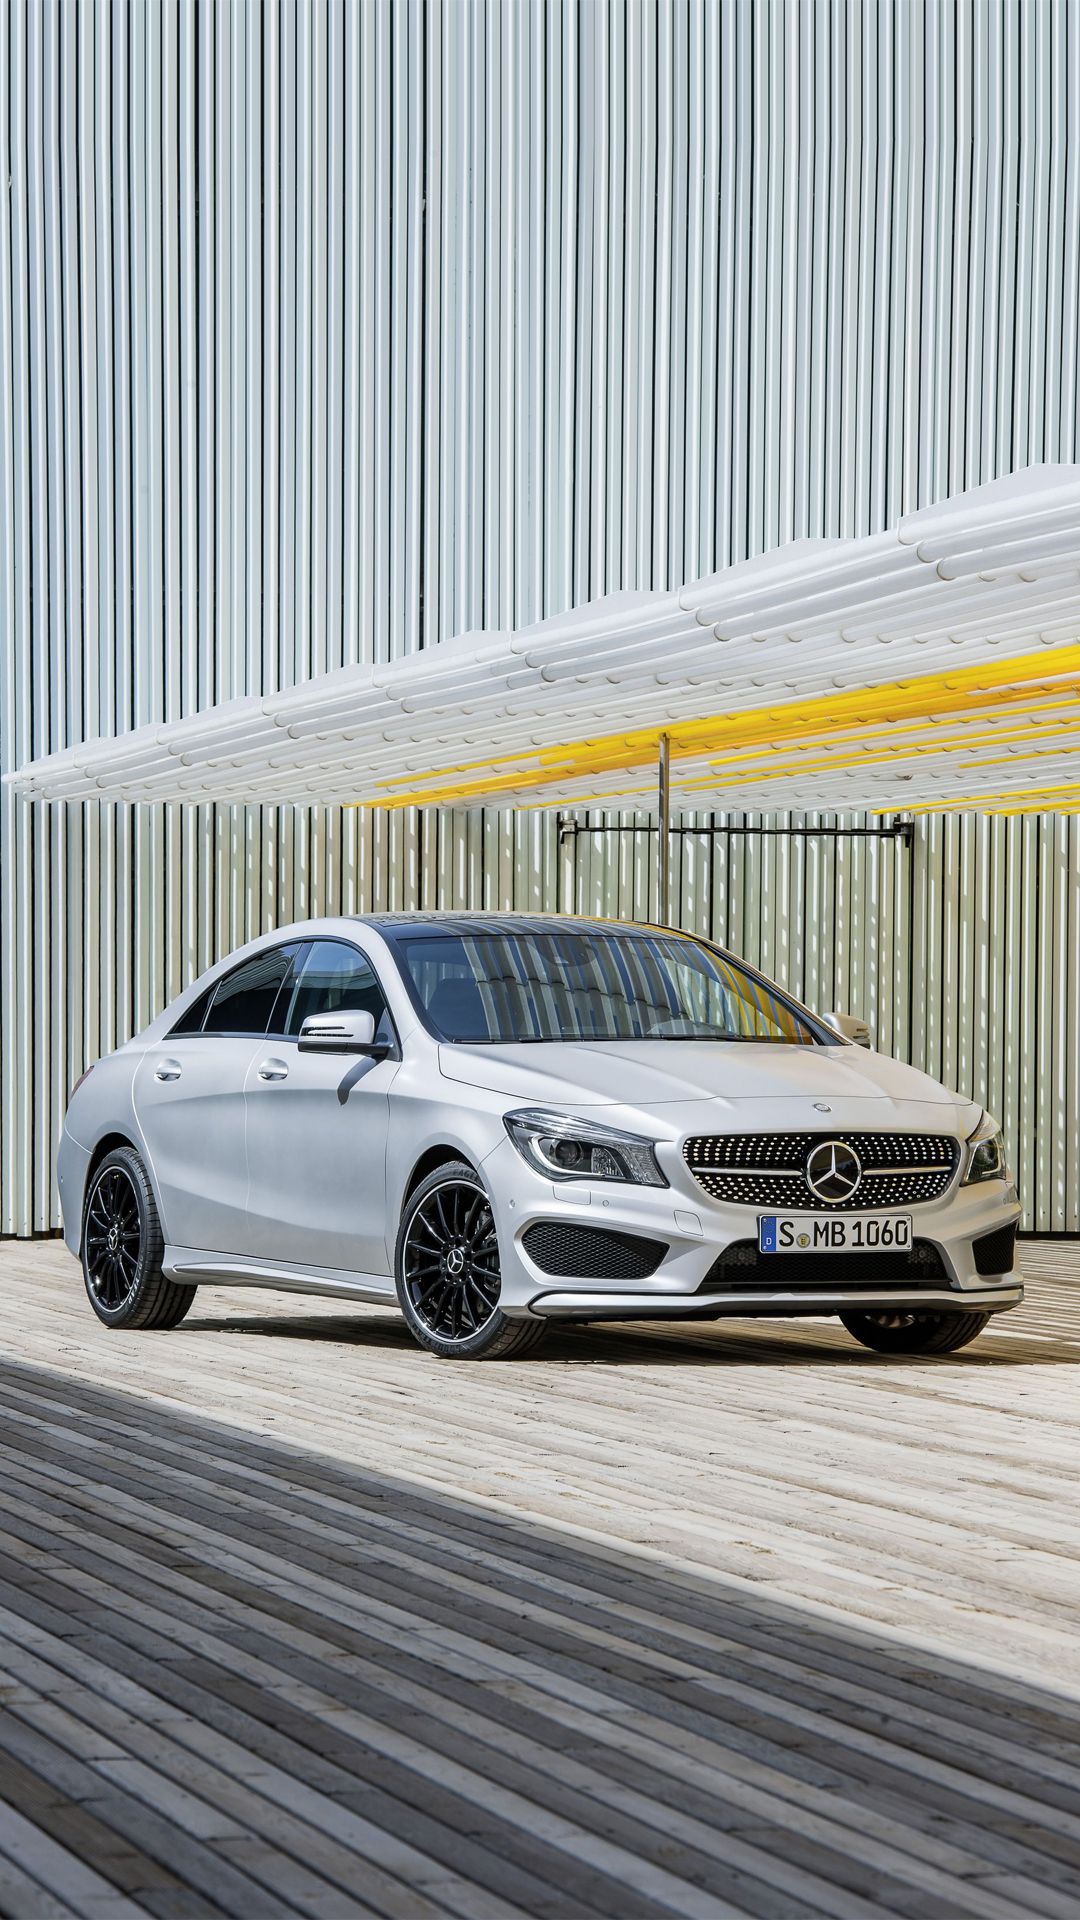 Mercedes CLA 45 AMG htc one wallpaper, free and easy to